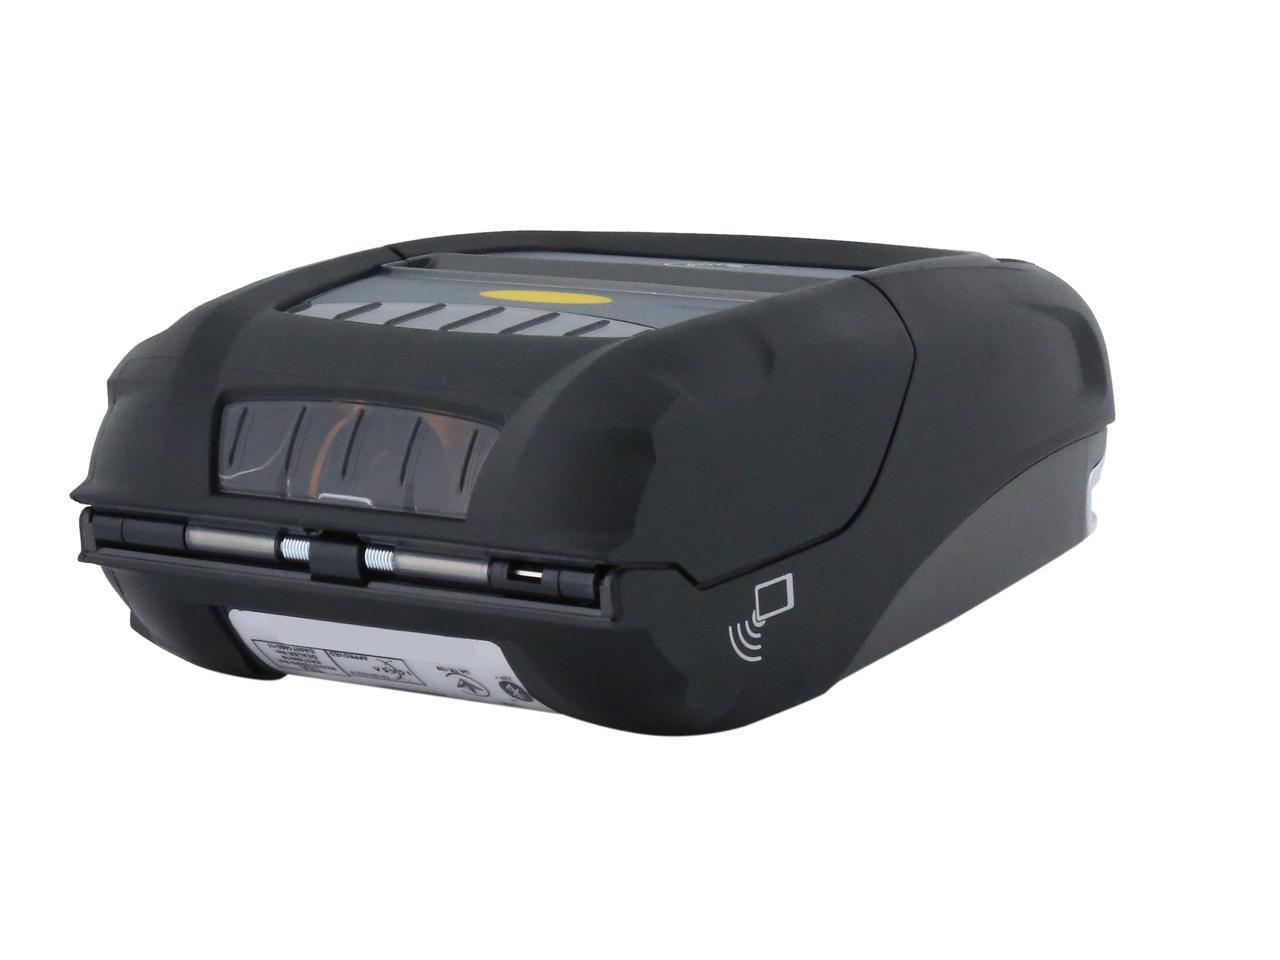 Zebra Zq510 3 Mobile Direct Thermal Receipt And Label Printer 203 Dpi Bluetooth 40 Linered 4513